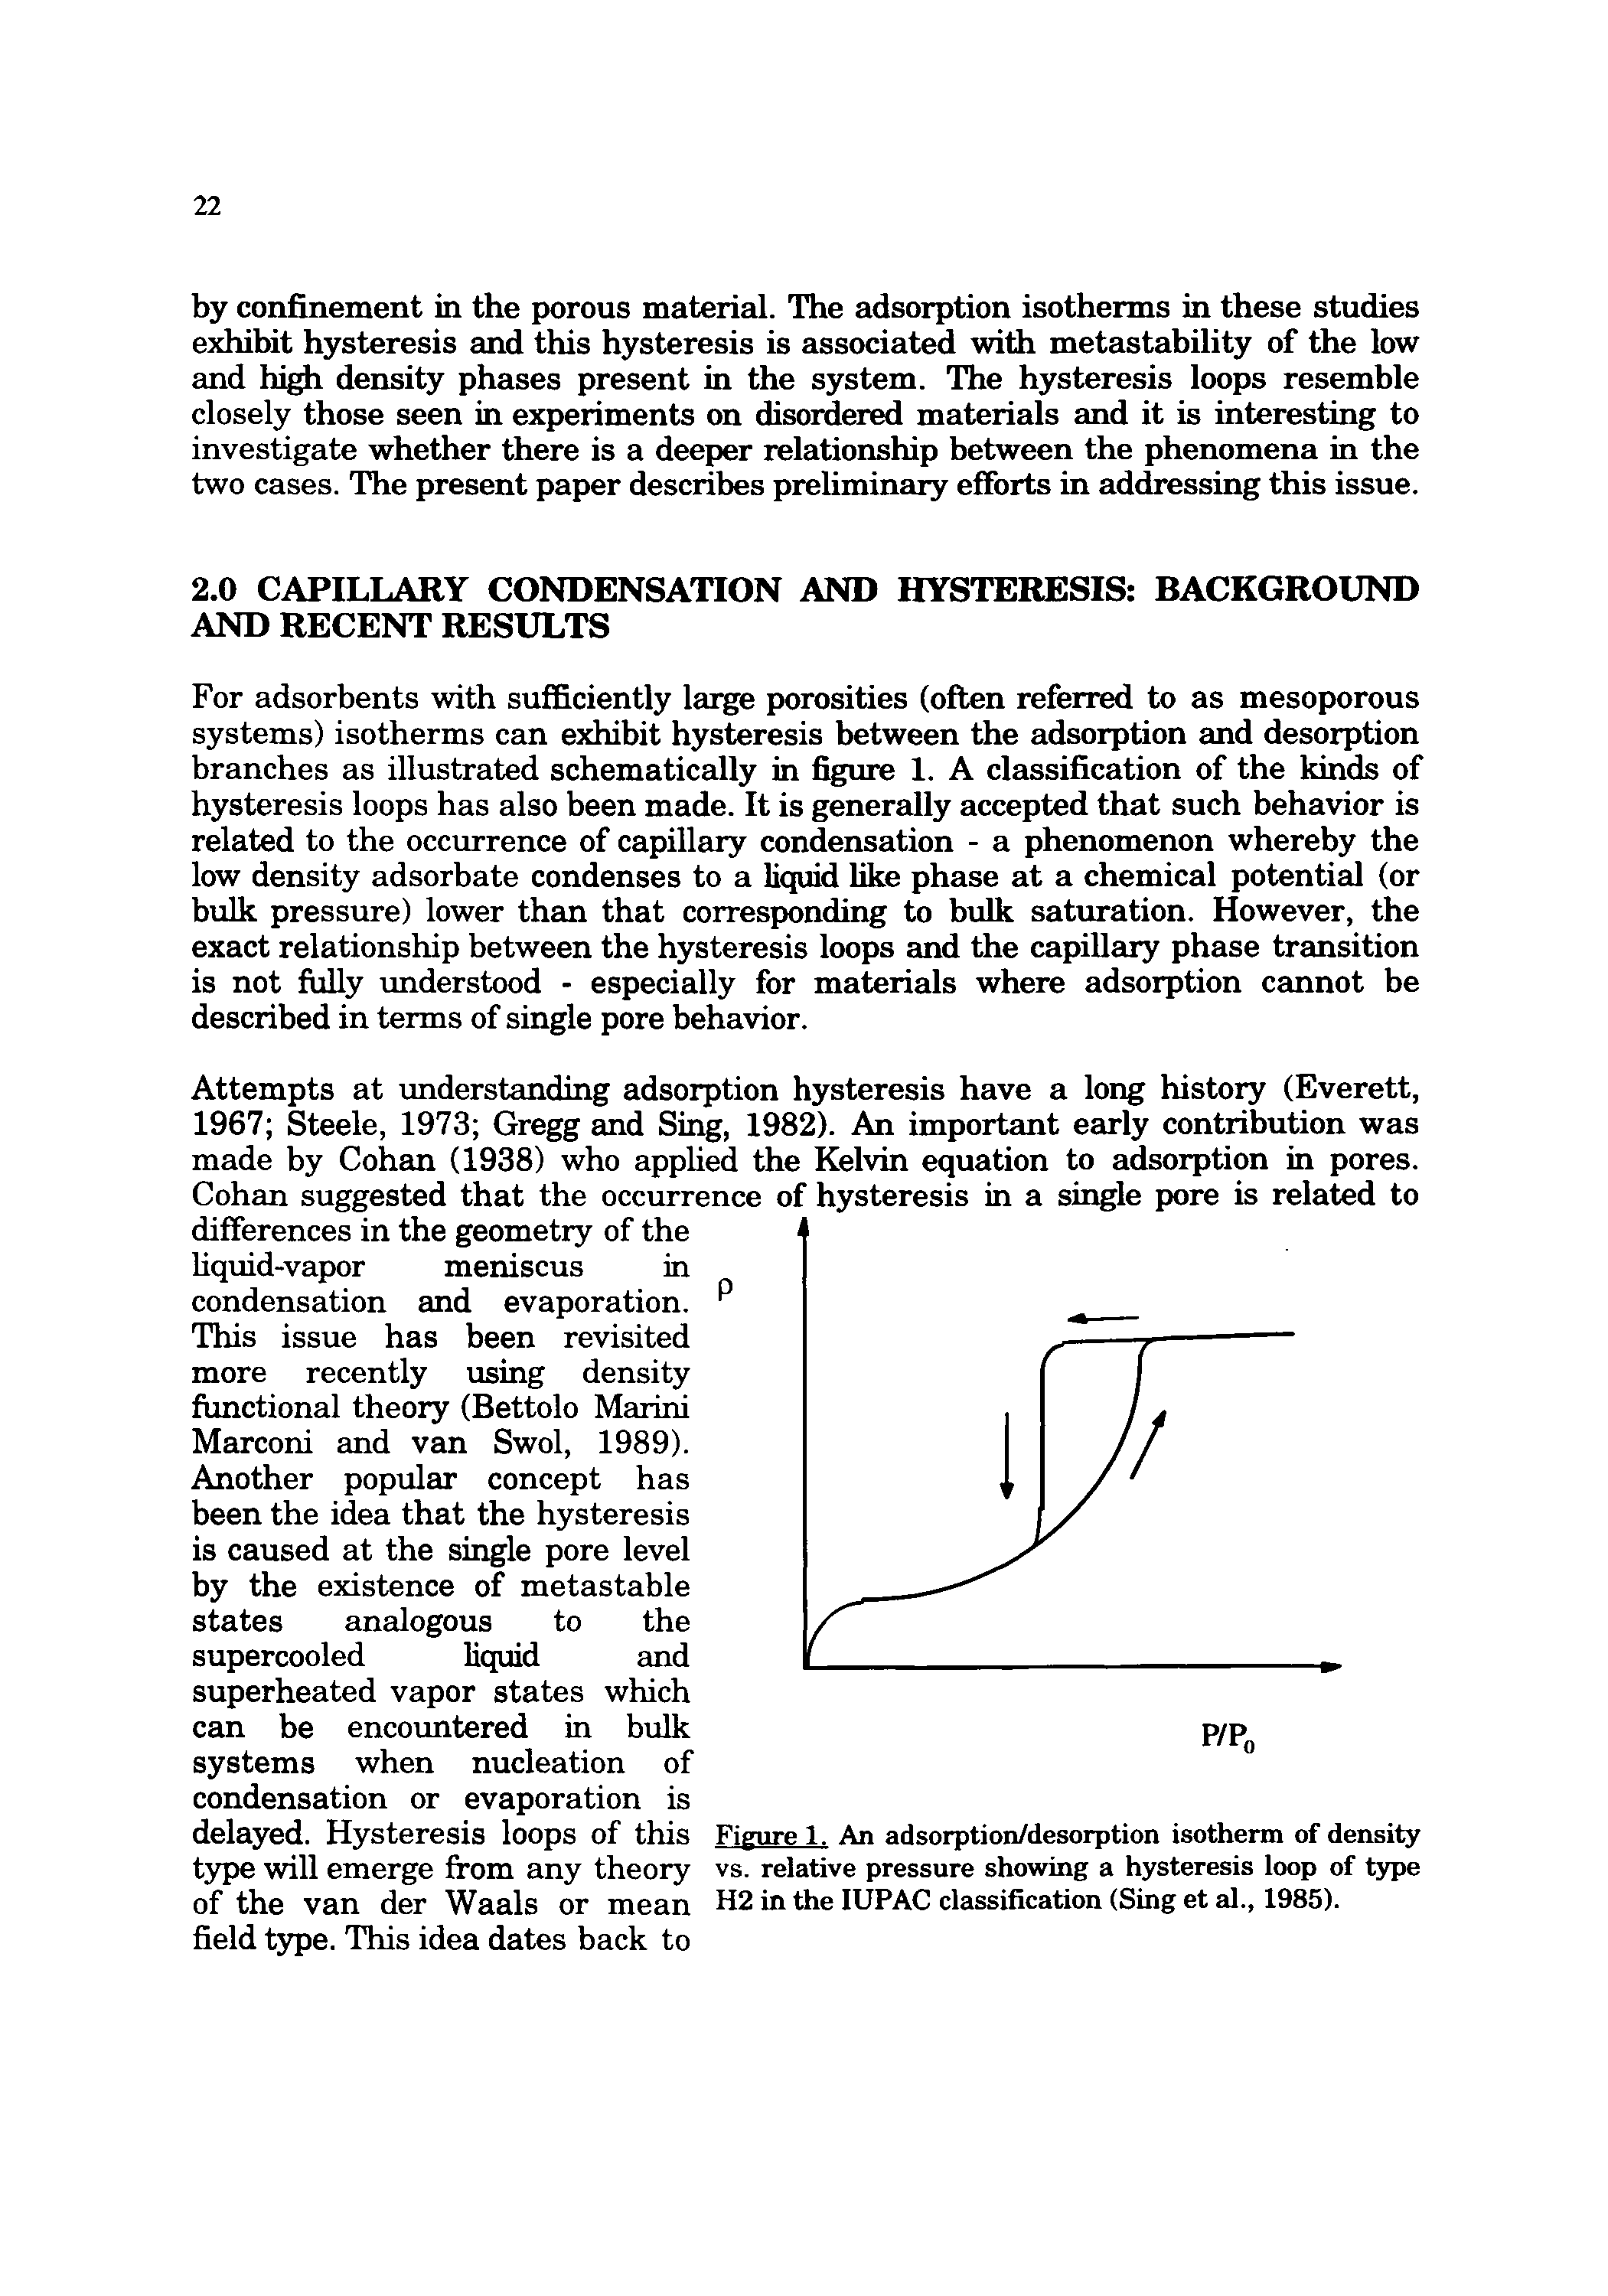 Figure 1. An adsorption/desorption isotherm of density vs. relative pressure showing a hysteresis loop of type H2 in the lUPAC classification (Sing et al., 1985).